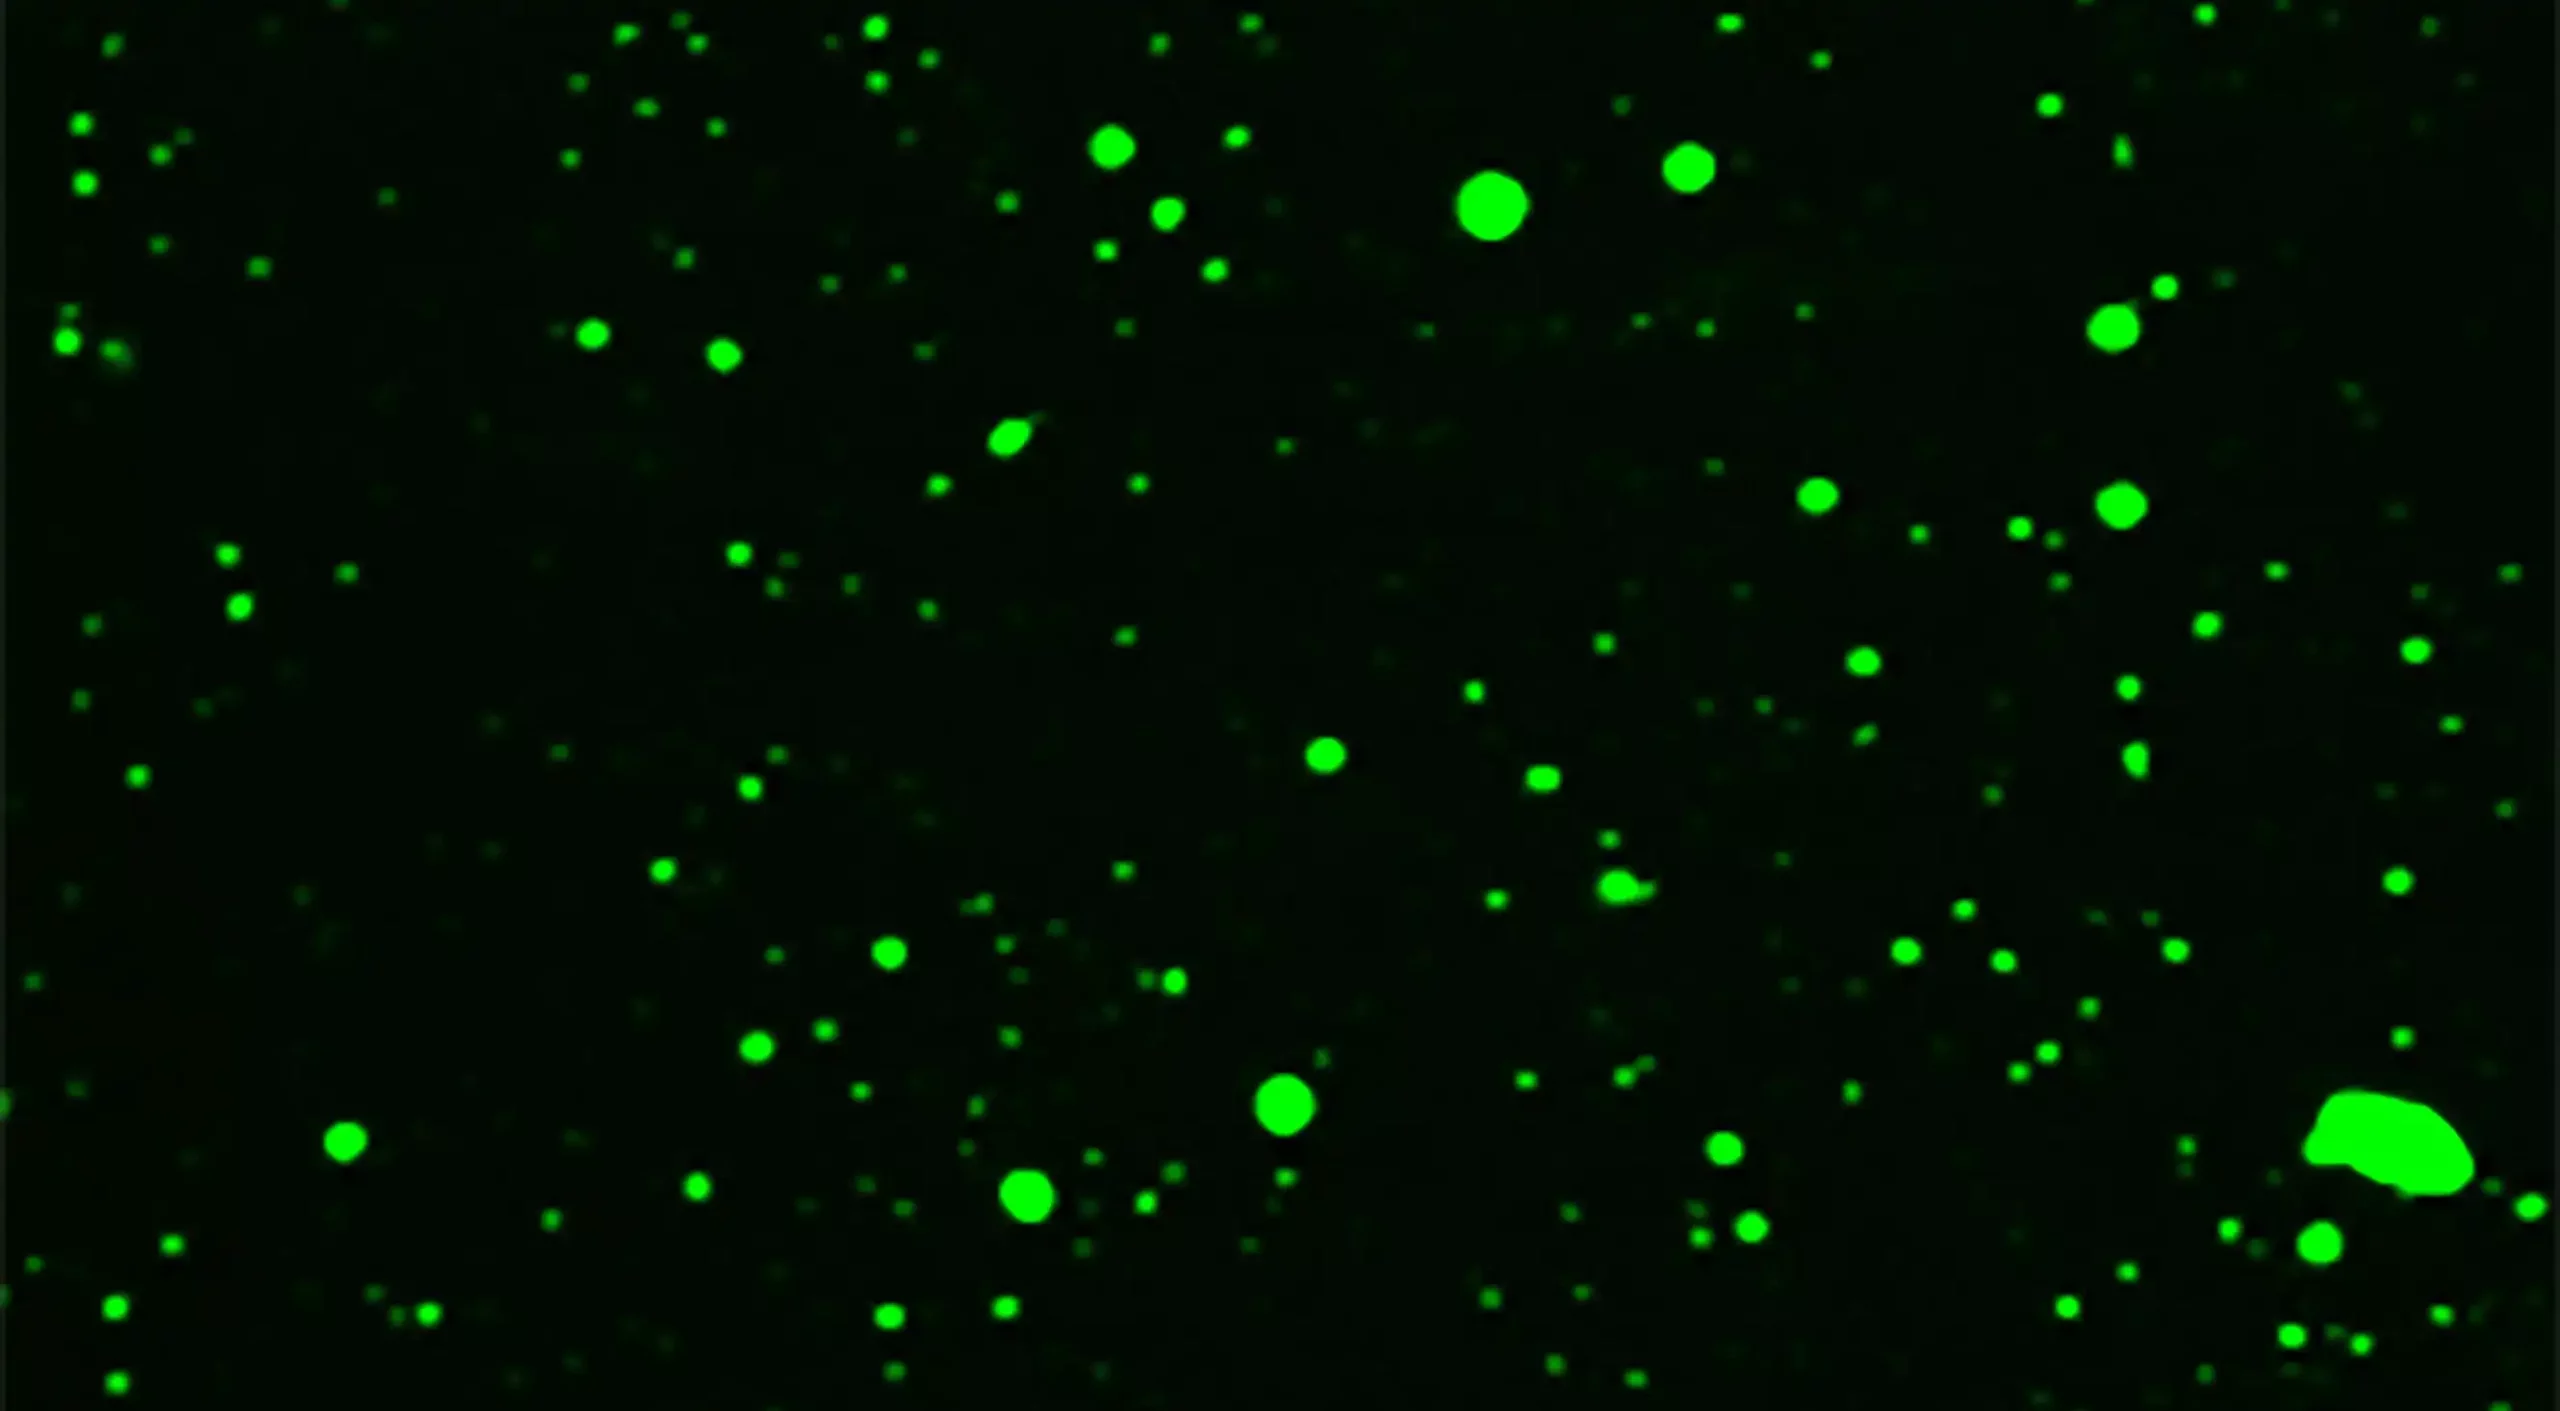 Image: Substrate-induced droplet formation of a plant TIR domain in vitro. The Arabidopsis TIR domain protein RPP1 was fused with the fluorescent protein GFP so that the rapid droplet formation of the RPP1-GFP fusion protein can be visualized by fluorescence microscopy after addition of the substrates NAD+ or ATP in a test tube. The droplets are highly dynamic structures. Credit: Max Planck Institute for Plant Breeding Research, Köln